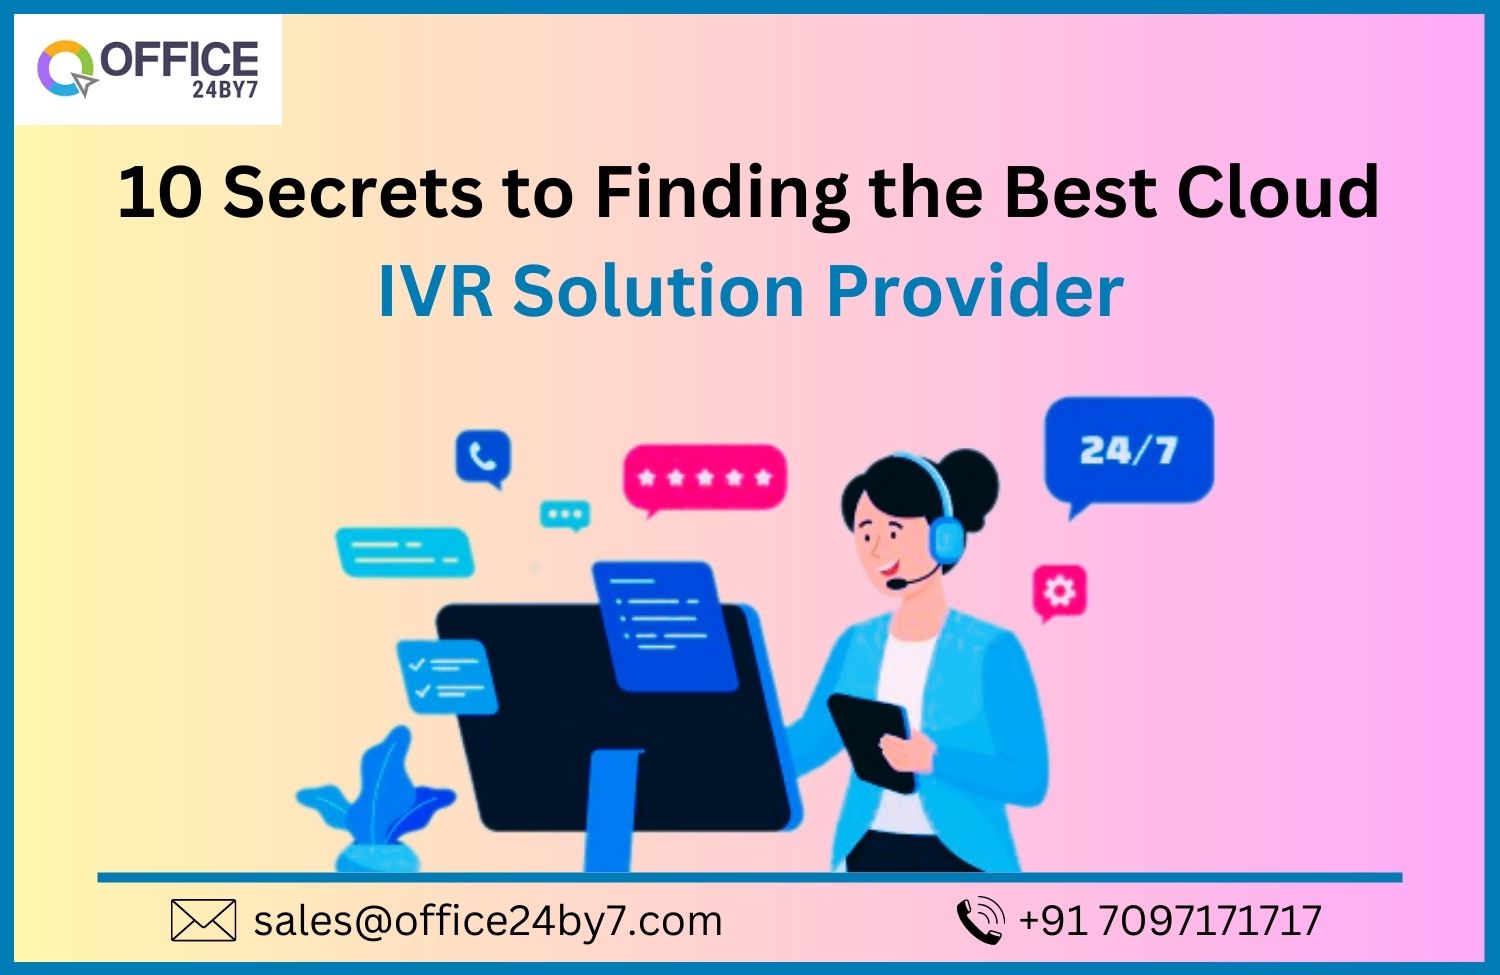 10 Secrets to Finding the Best Cloud IVR Solution Provider